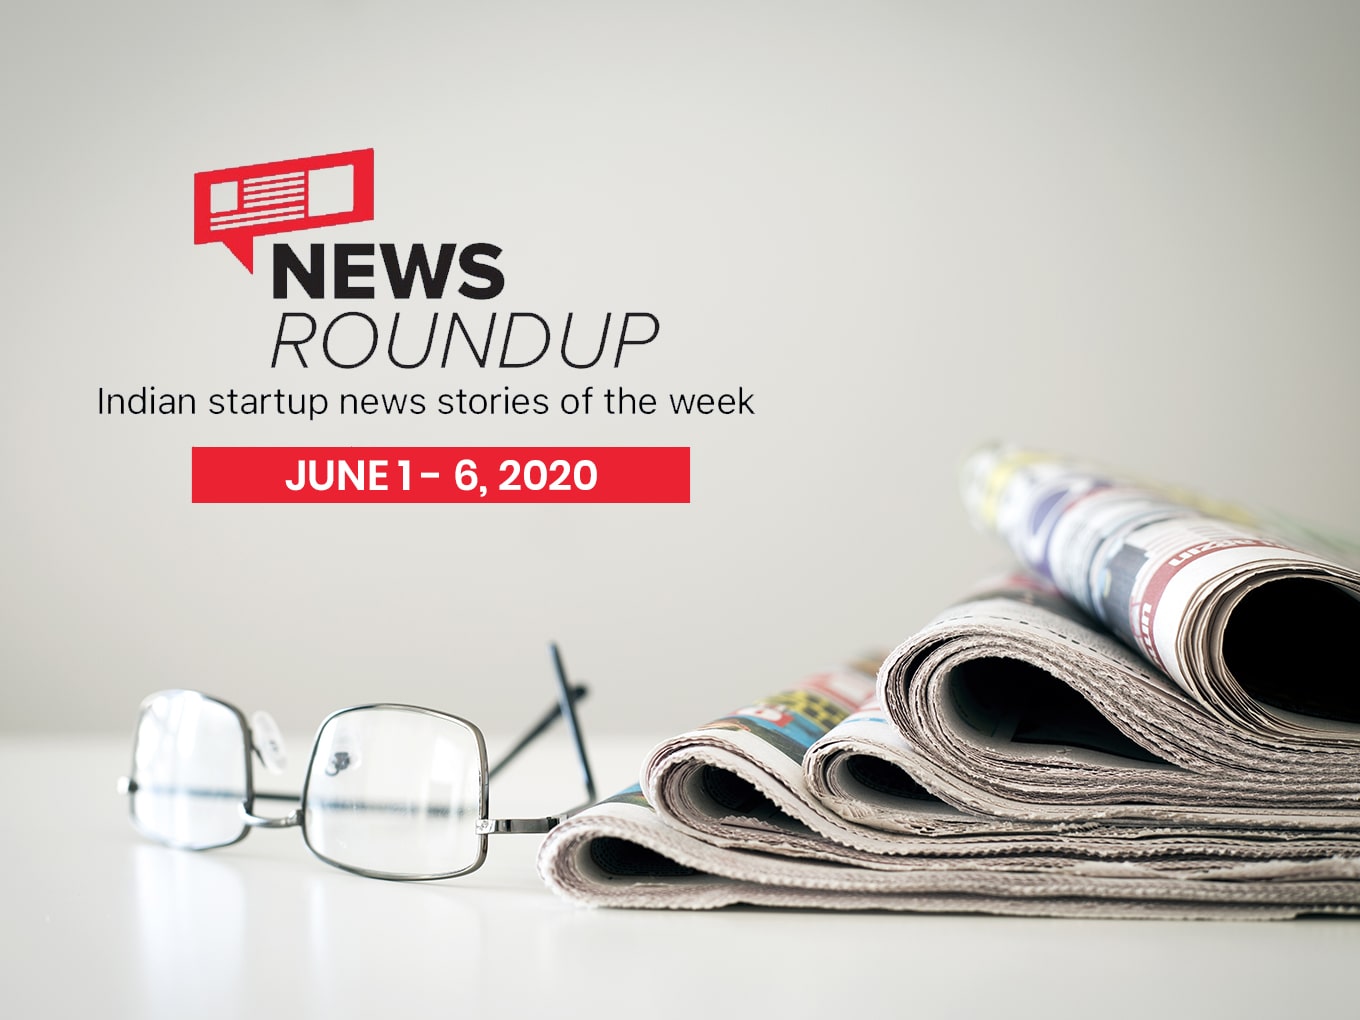 News Roundup: 11 Indian Startup News Stories You Don’t Want To Miss This Week [June 1 - 6]